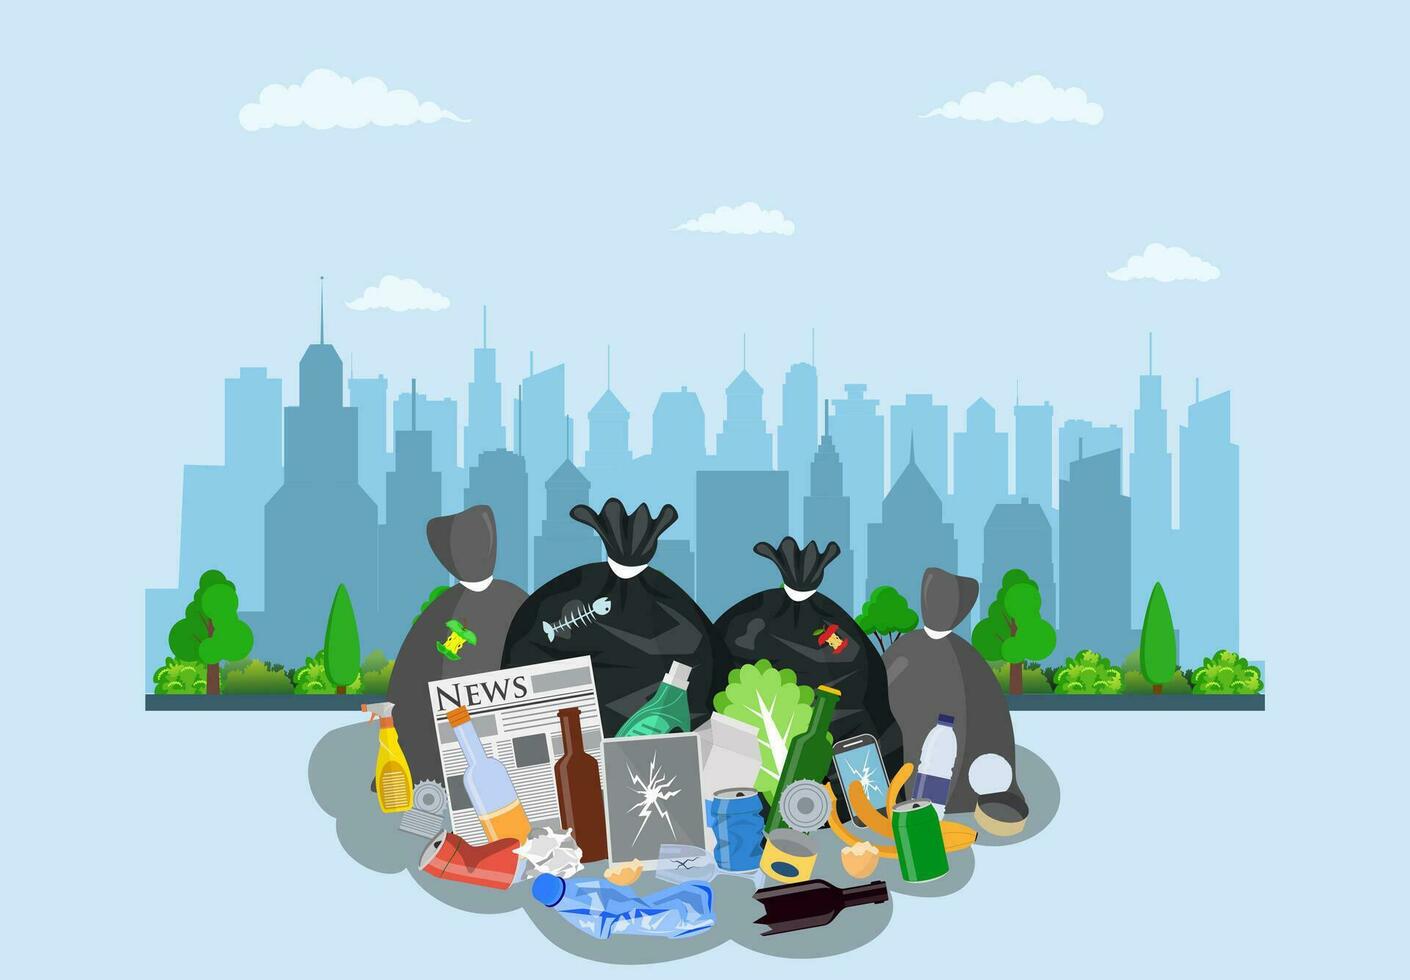 Steel garbage bin full of trash on street with city skyline. Garbage recycling and utilization equipment. Vector illustration in flat style